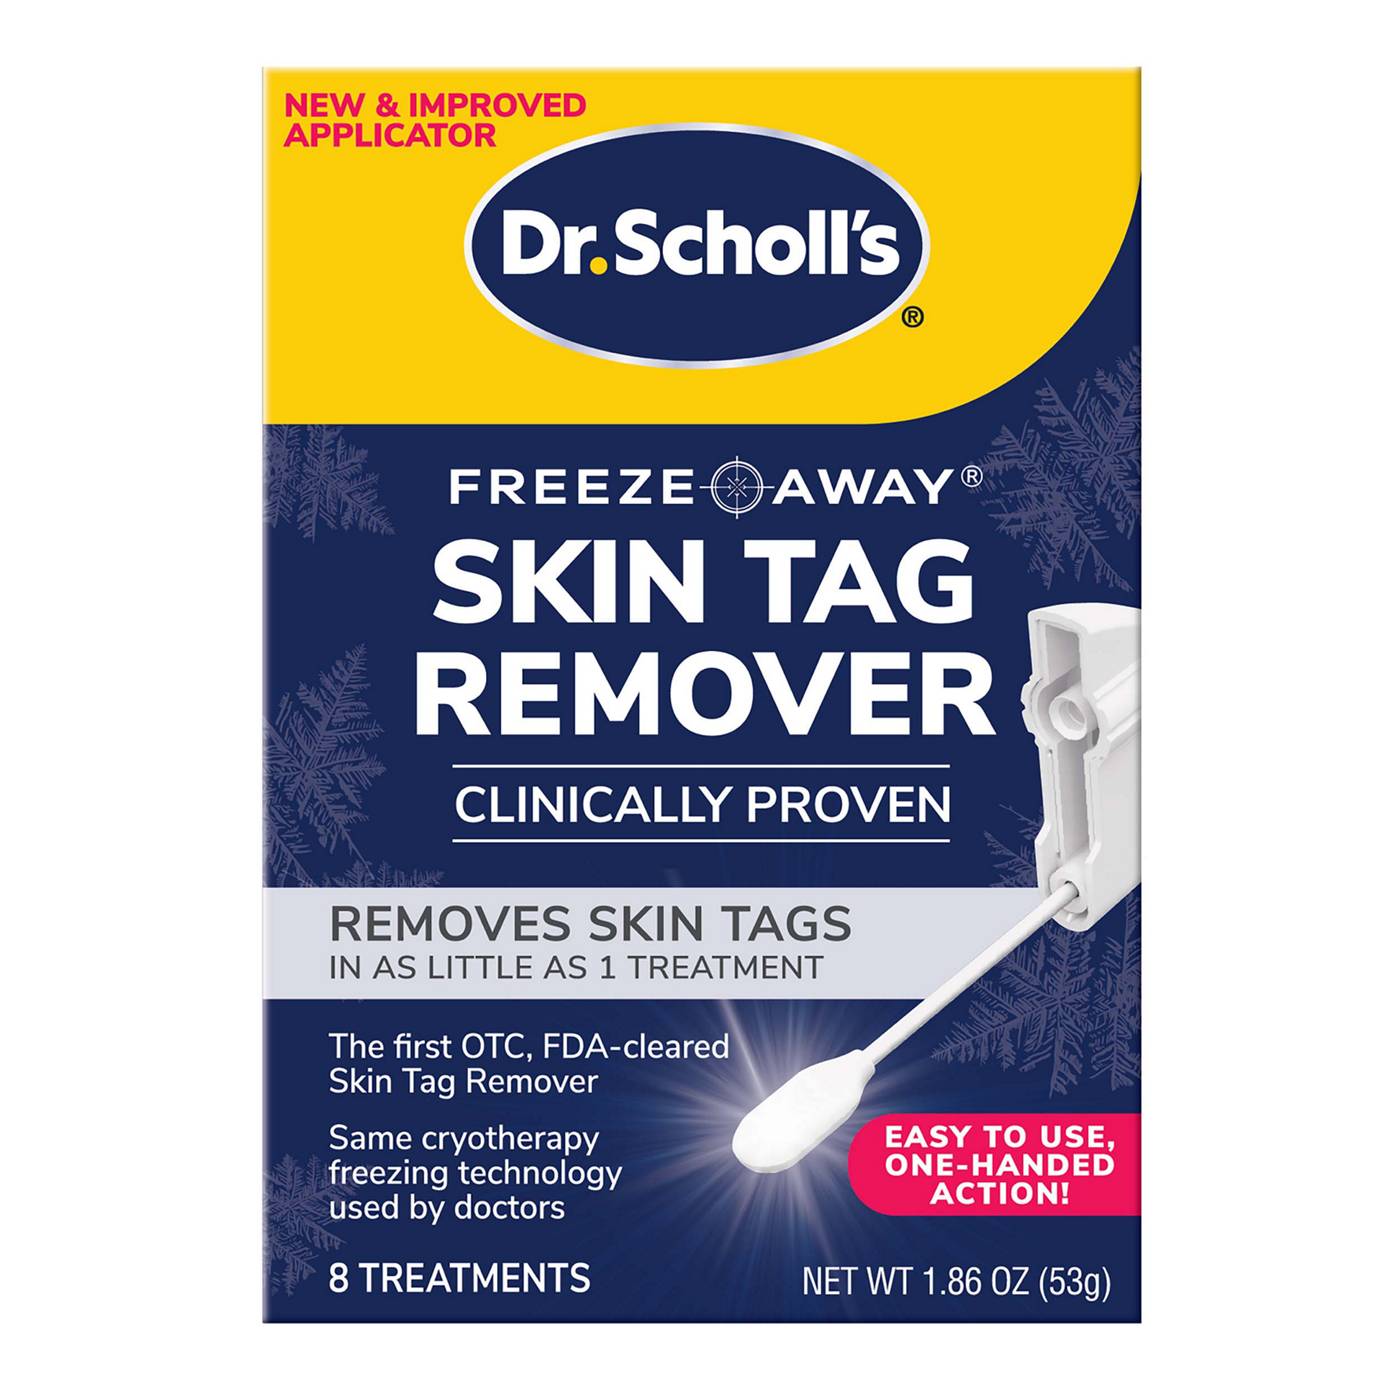 Dr. Scholl's Freeze Away Skin Tag Remover; image 1 of 6